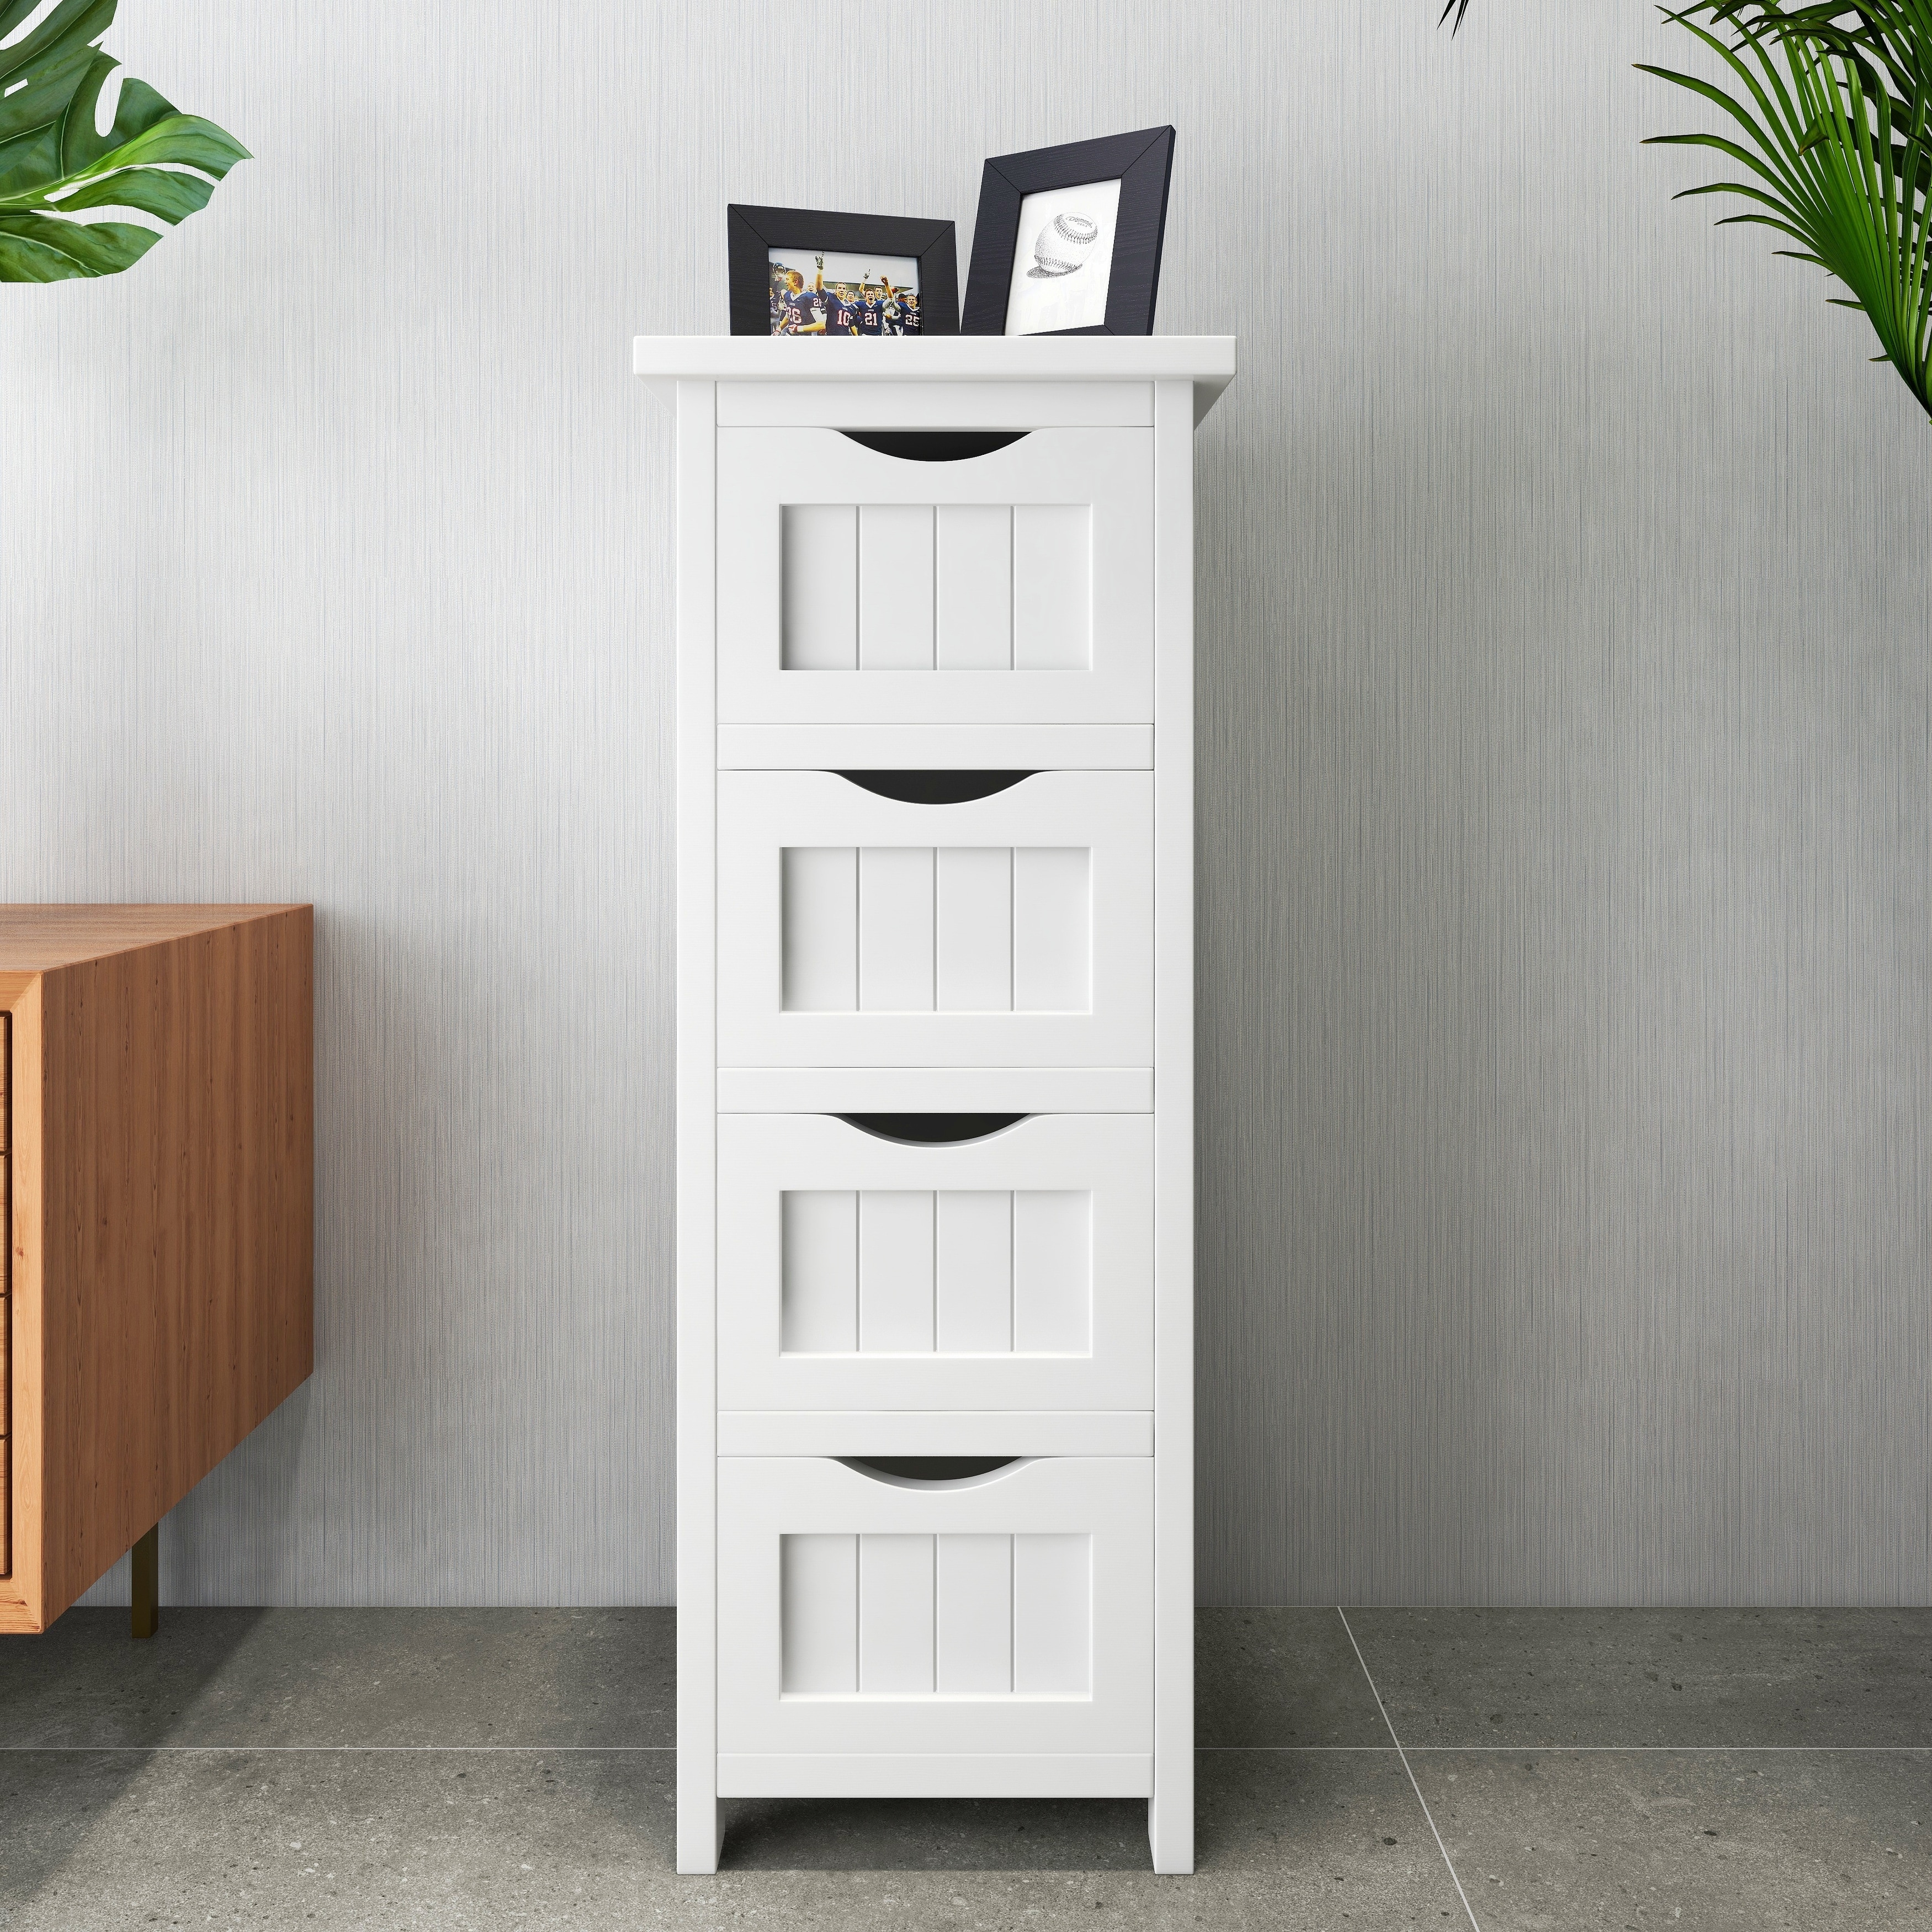 https://ak1.ostkcdn.com/images/products/is/images/direct/d4161ba0d8b9fe7f282fc4edfac6a618be0ae119/Space-Saver-Bathroom-Storage-Cabinet-in-White.jpg